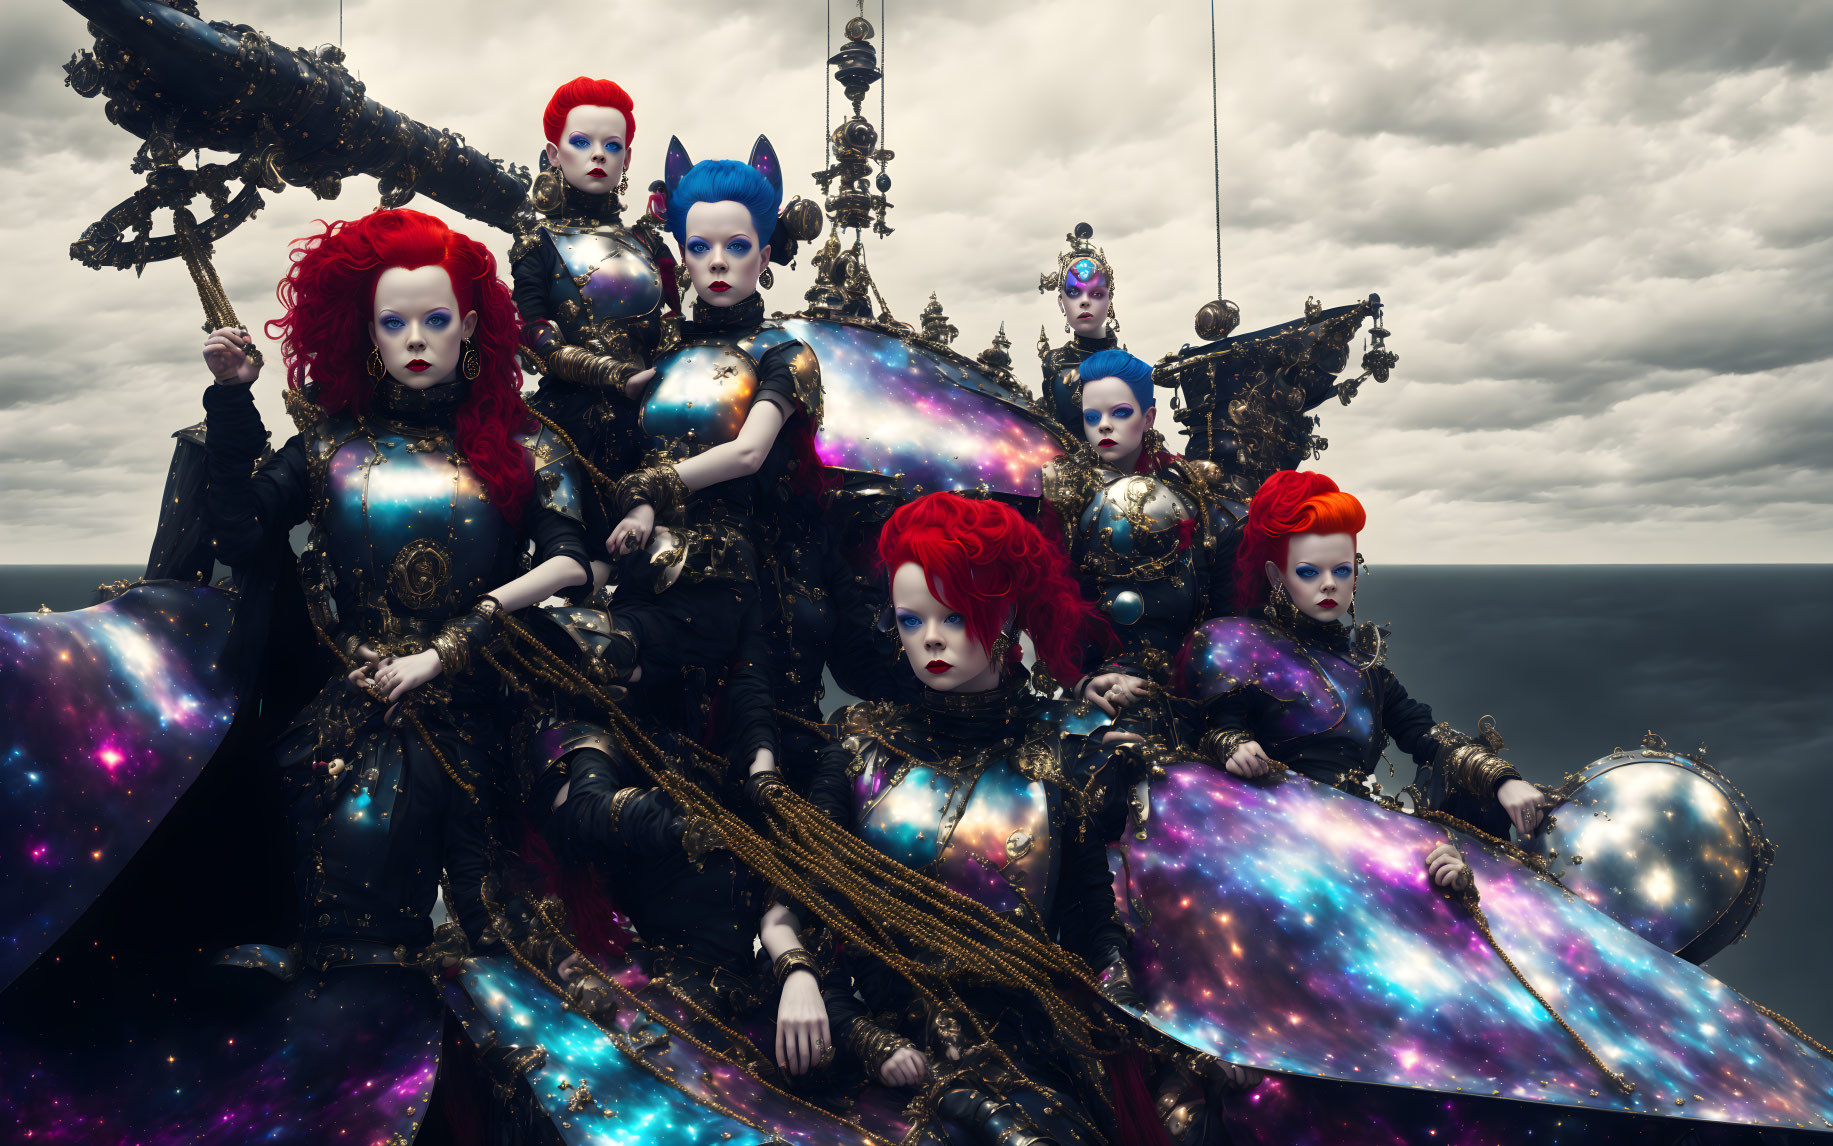 Futuristic cosmic-themed characters with dramatic sky background